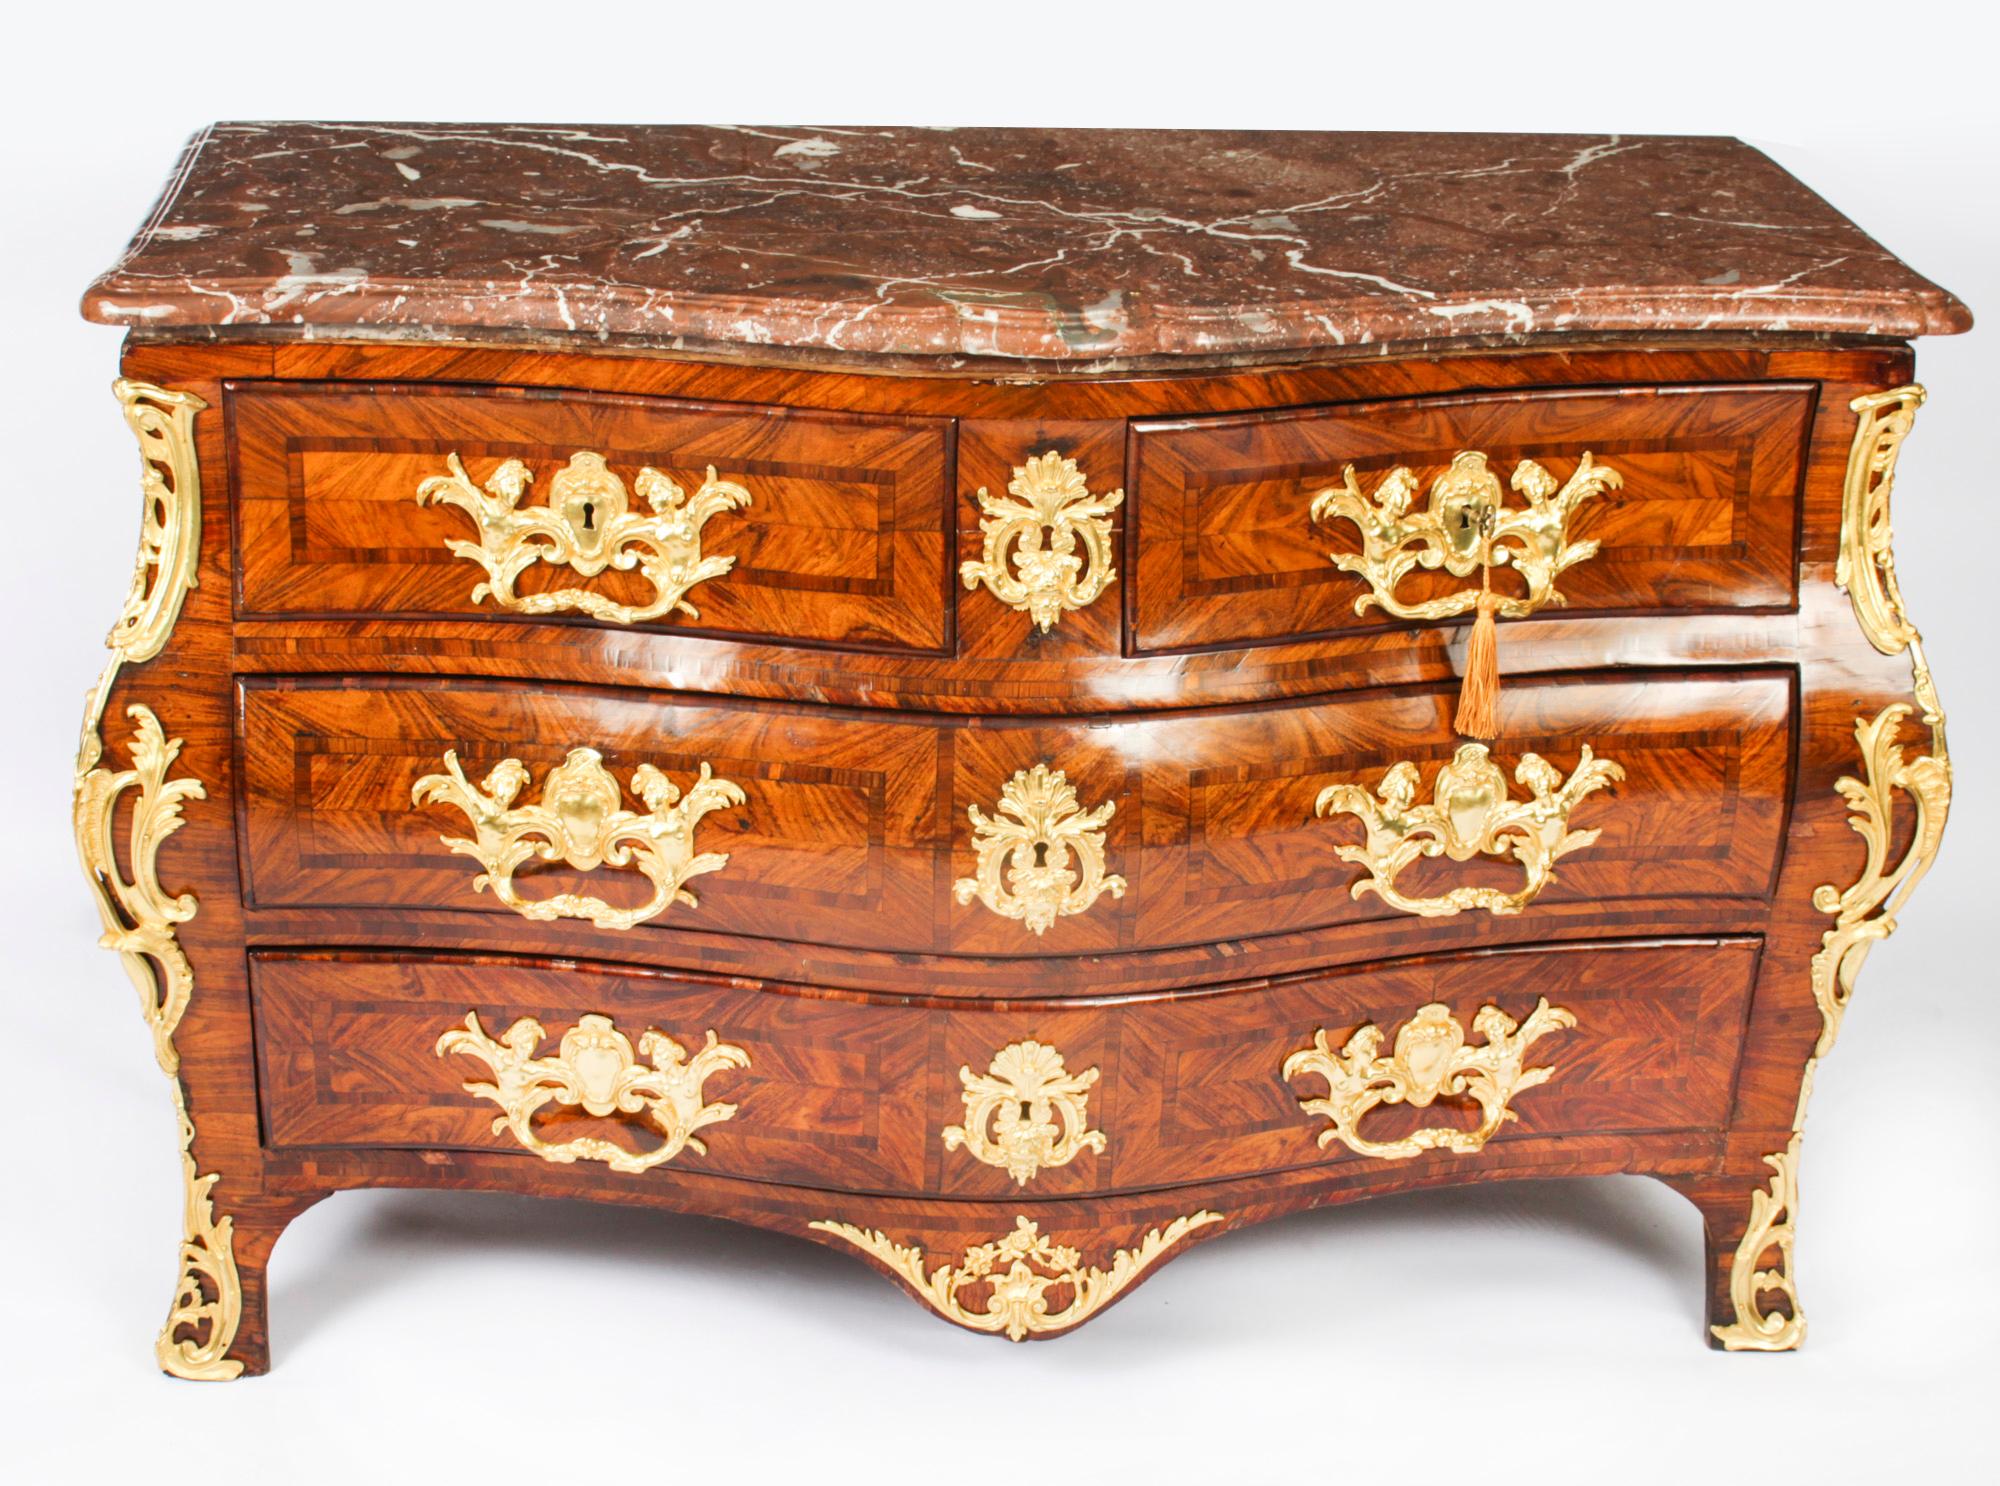 This is an impressive and rare antique French Régence wood and ormolu mounted commode, circa 1720 in date.
 
The stunning breche violette marble top over a serpentine front having two short over two full width drawers, the drawers fitted with